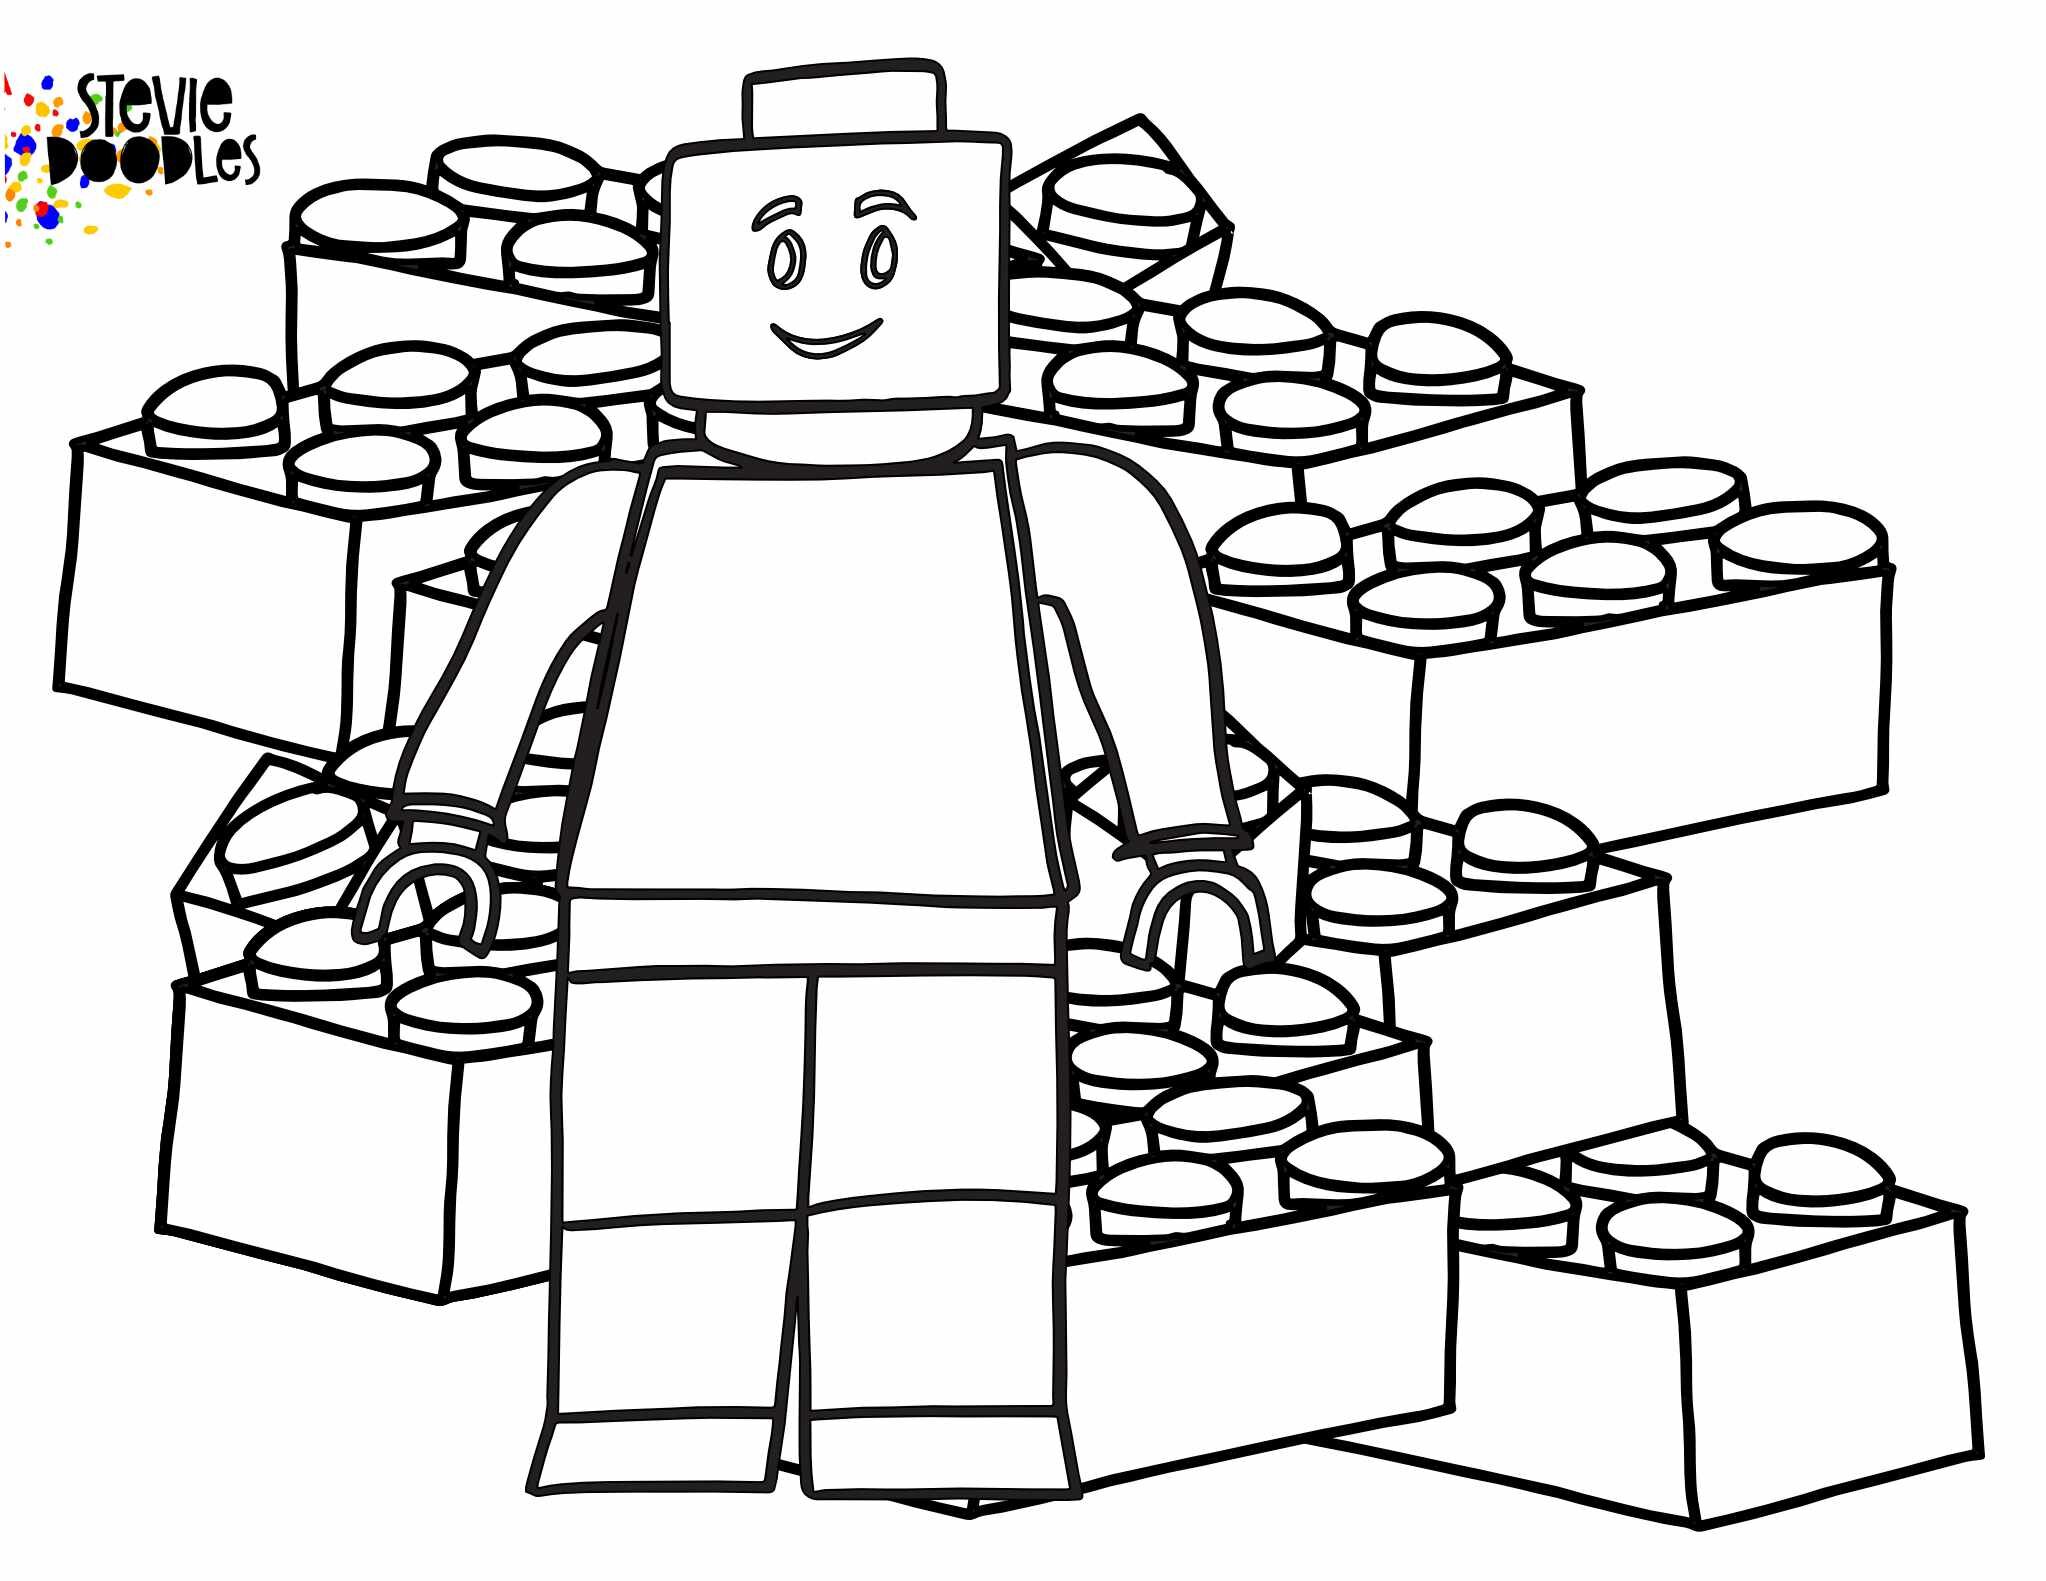 LEGO Gifted By God Coloring Pages FREE — Stevie Doodles